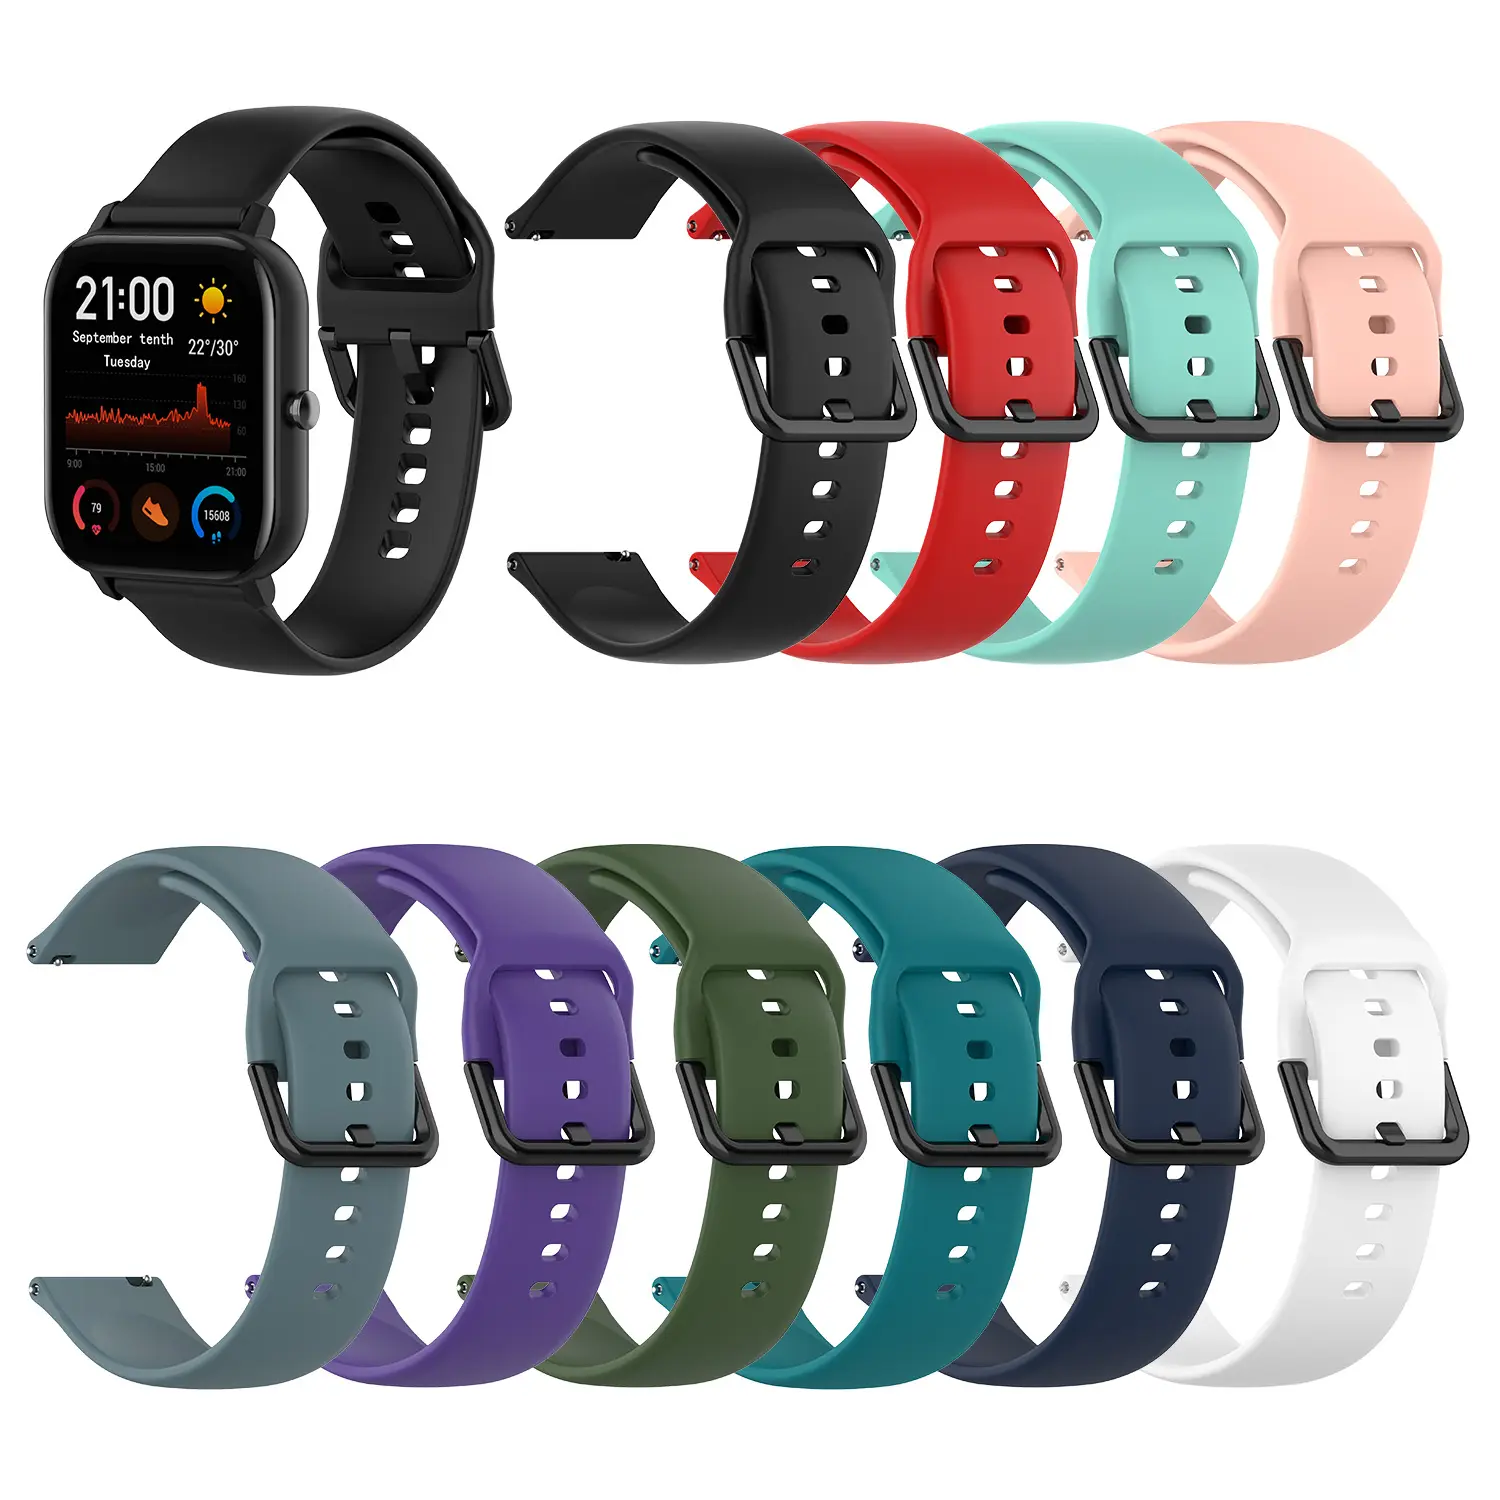 20mm Silicone Sport Strap Soft Rubber Waterproof Replacement Band Correa For Amazfit GTS Samsung Galaxy Watch 42mm S2 Active2